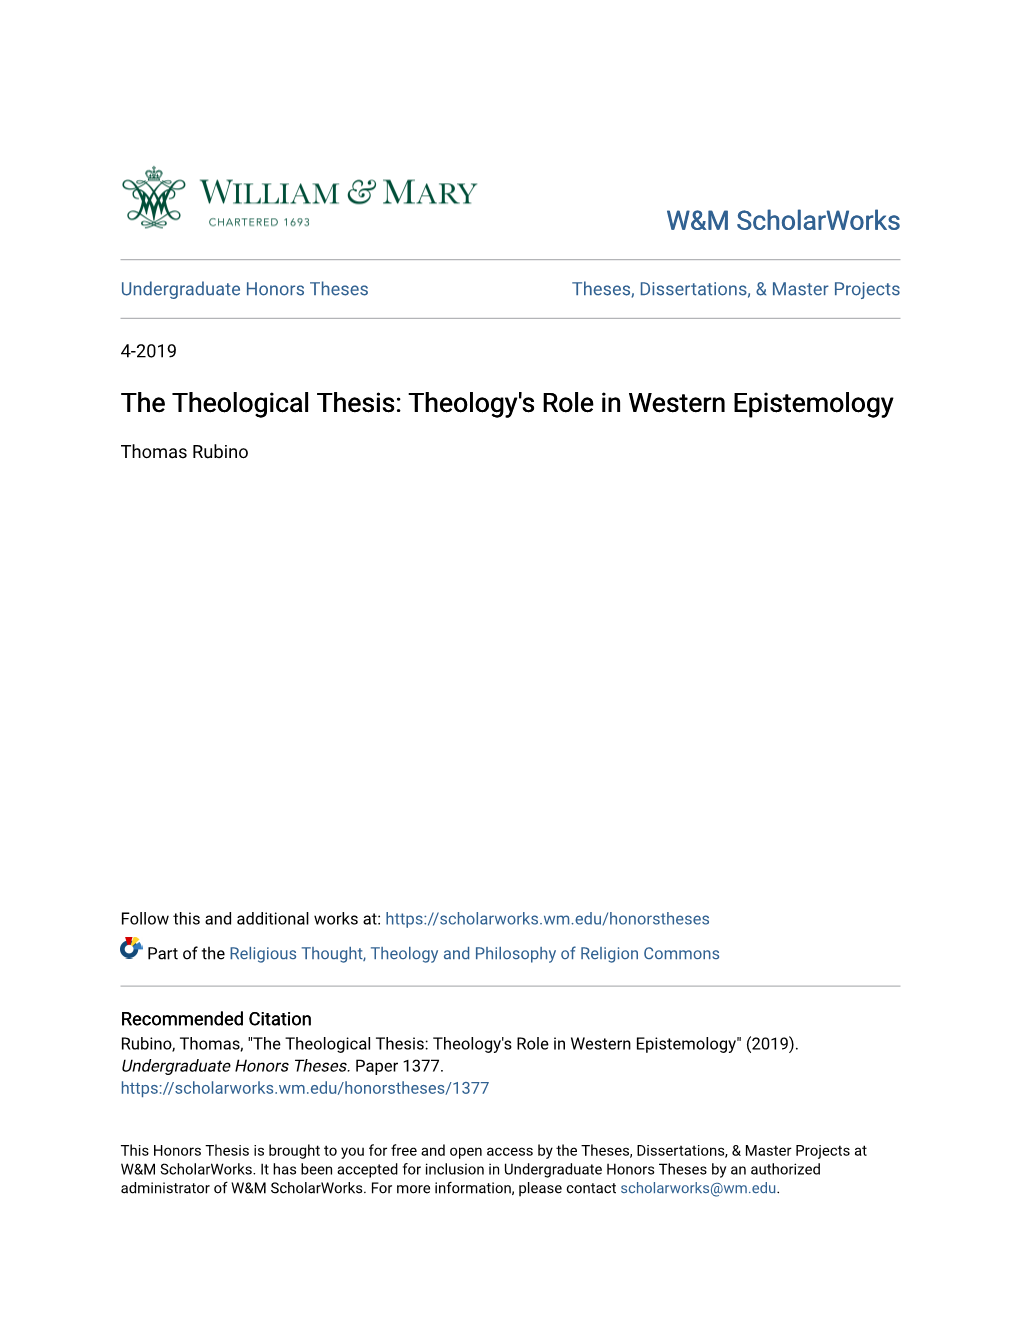 Theology's Role in Western Epistemology